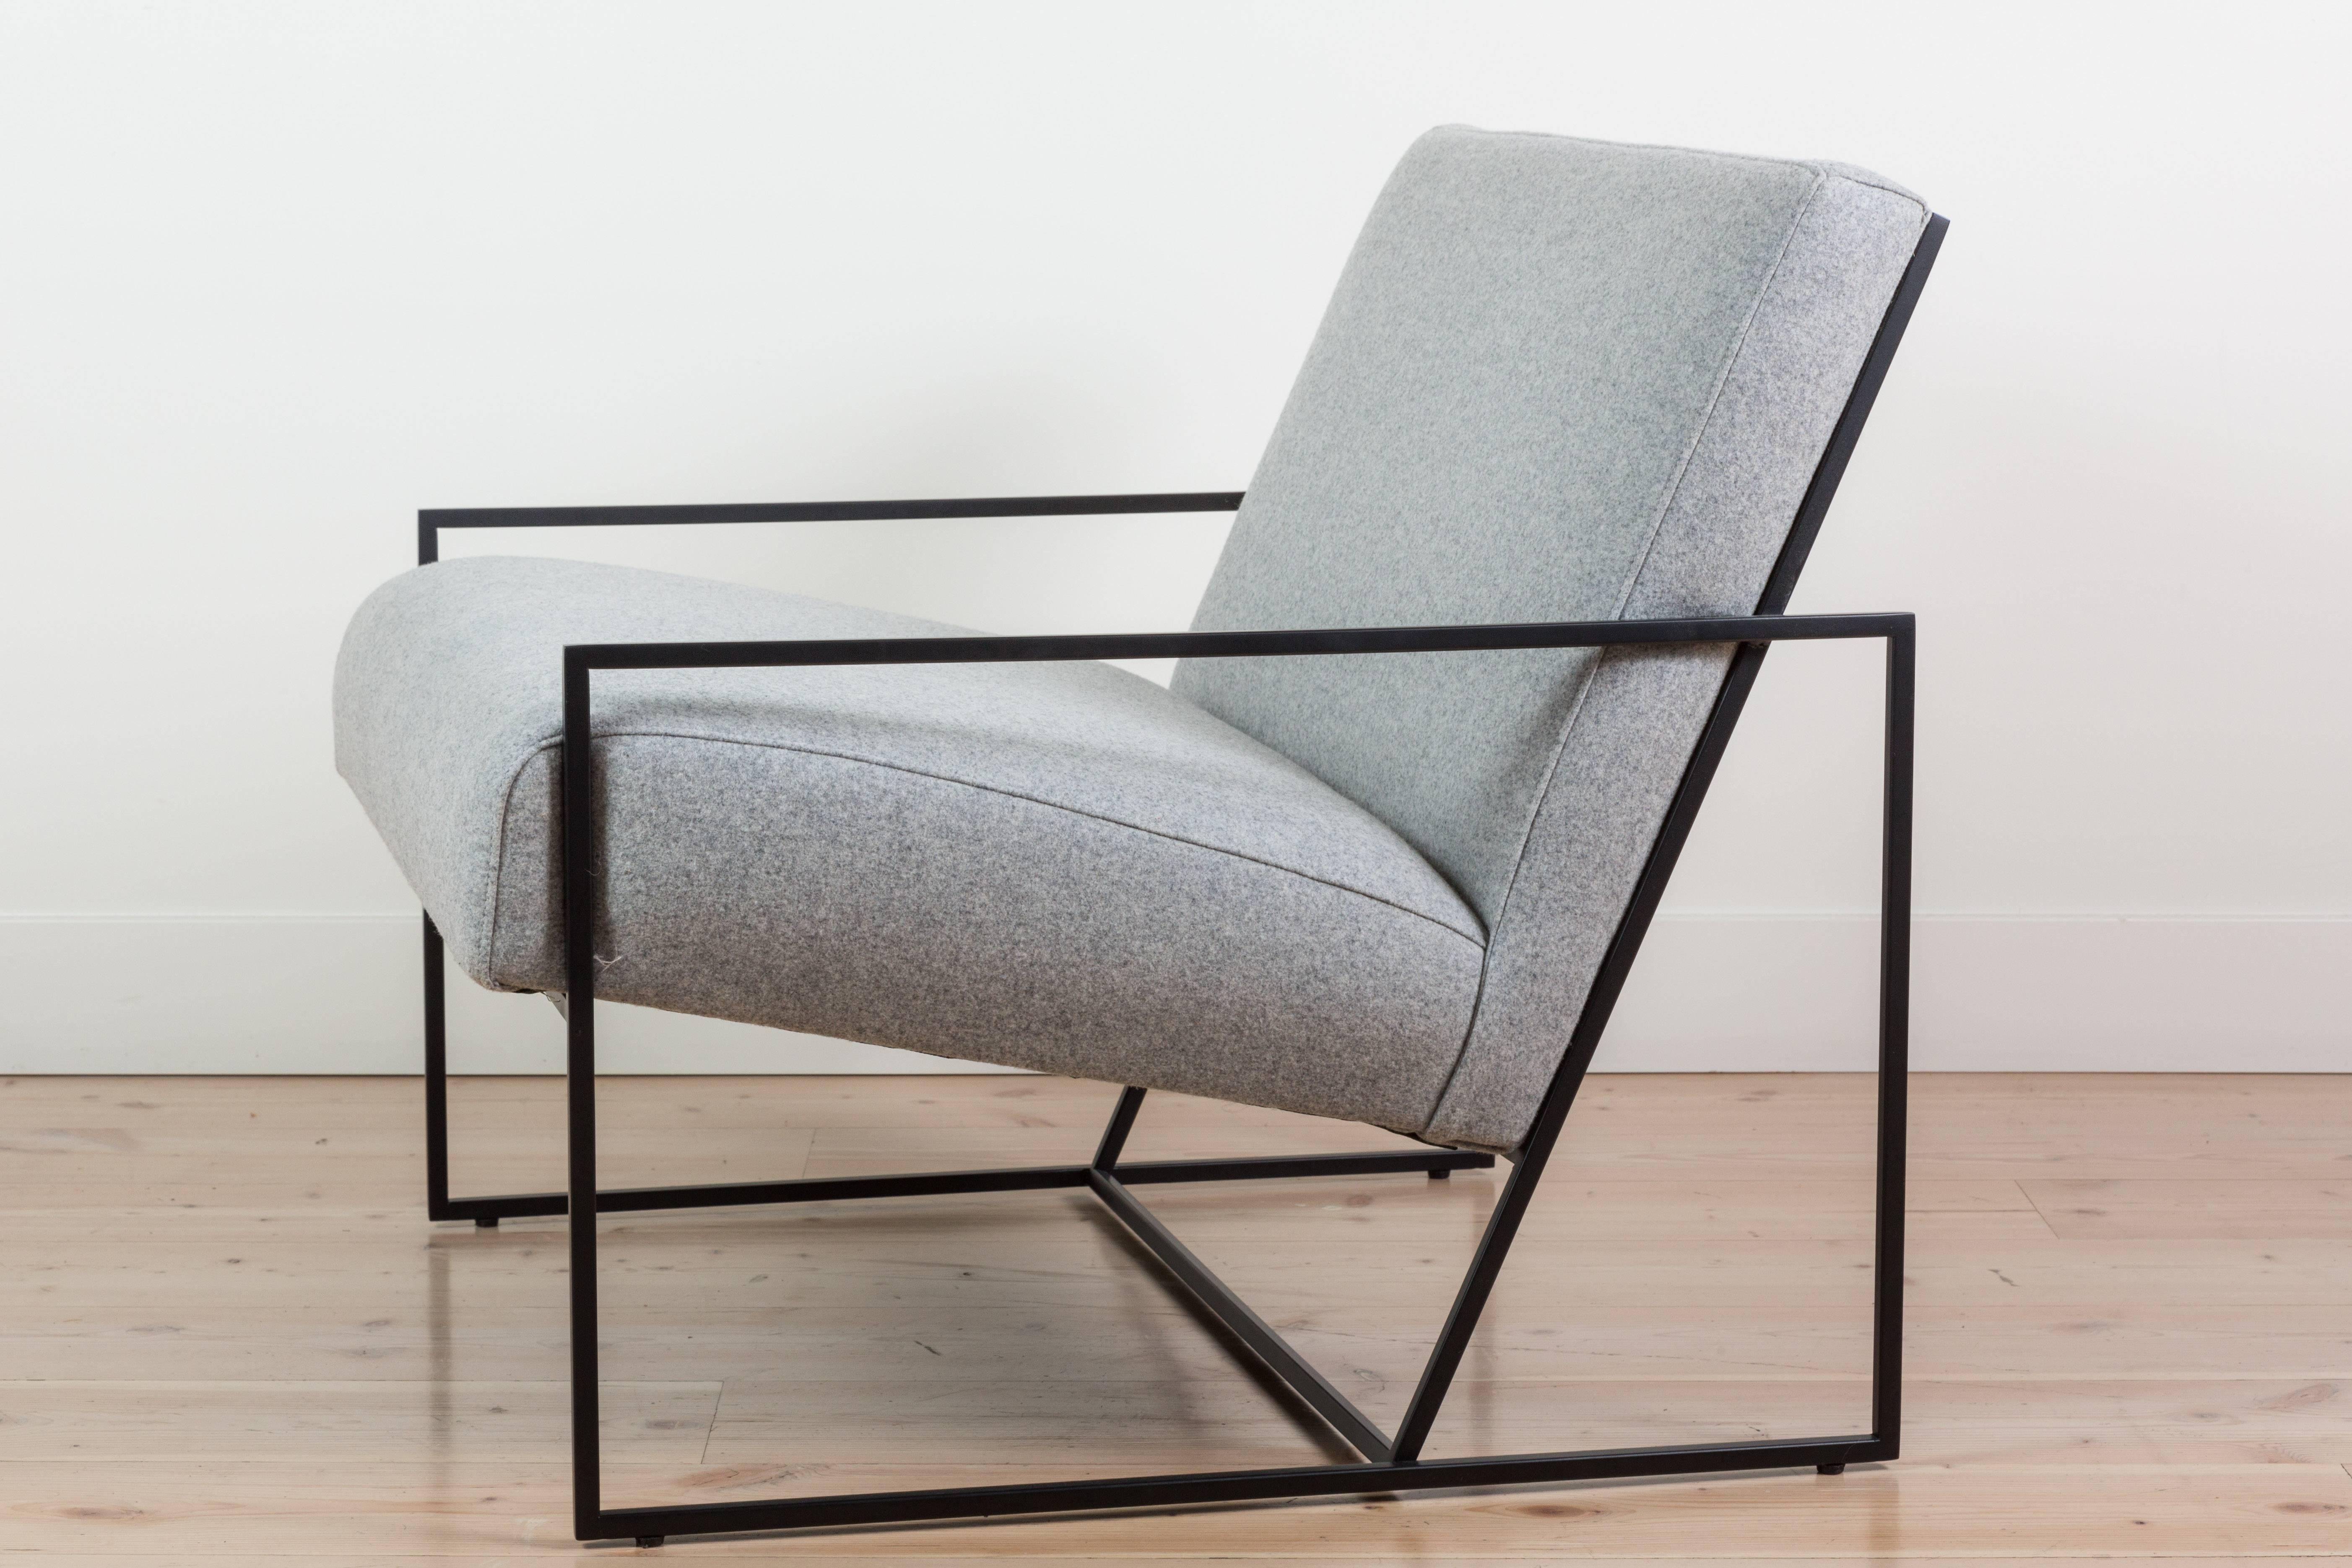 Thin frame lounge chair by Lawson-Fenning

Available to order in customers own materials with a 6-8 week lead time. 

As shown: $2,050
To order: $1,750 + COM.